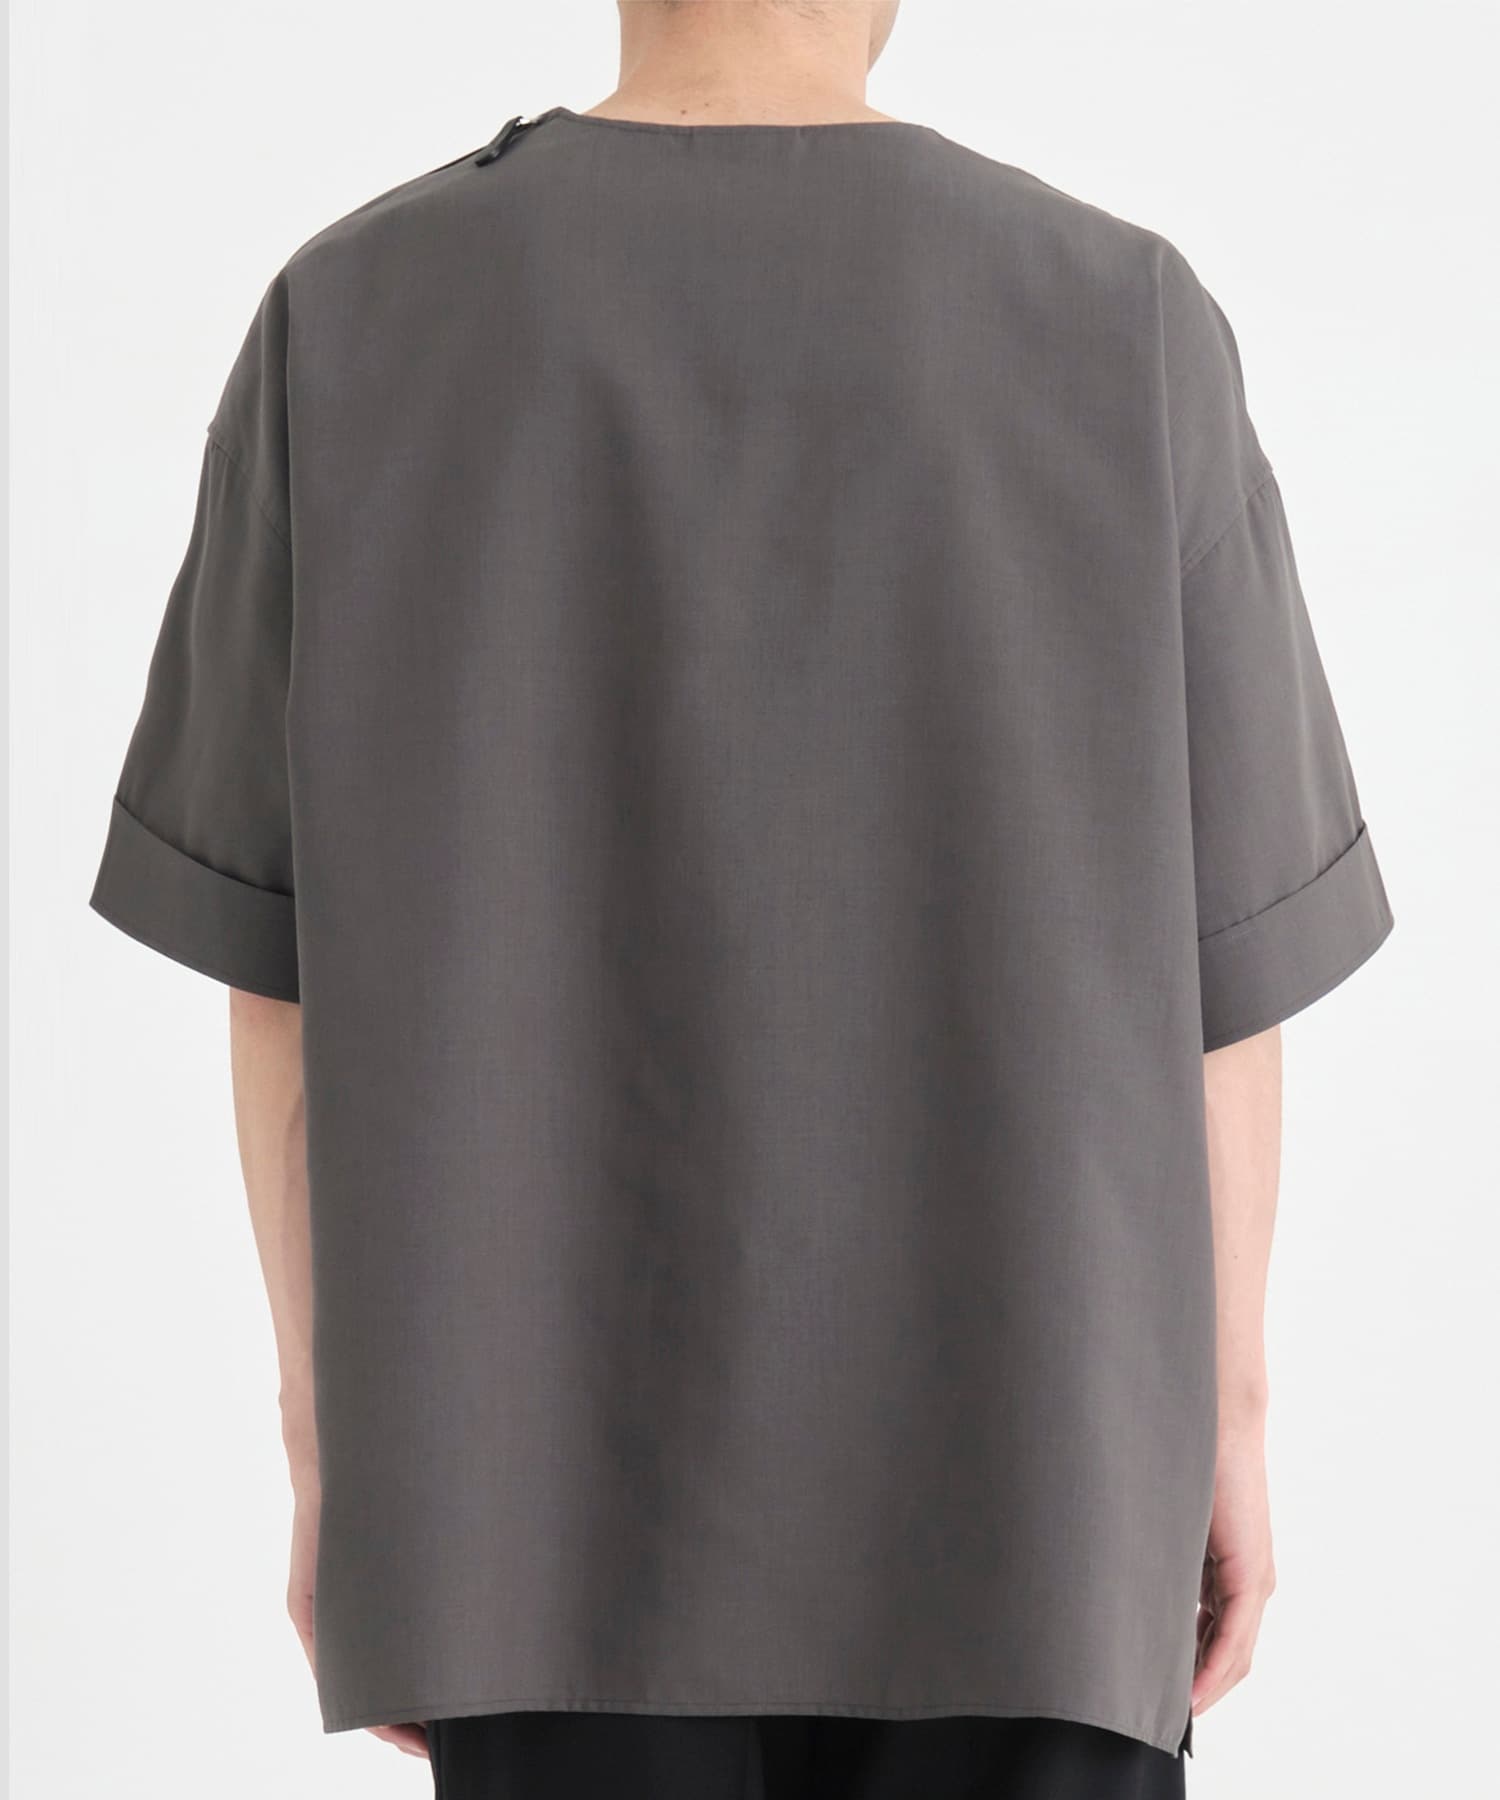 THE SIDE ZIP PO SHIRT S/S THE RERACS